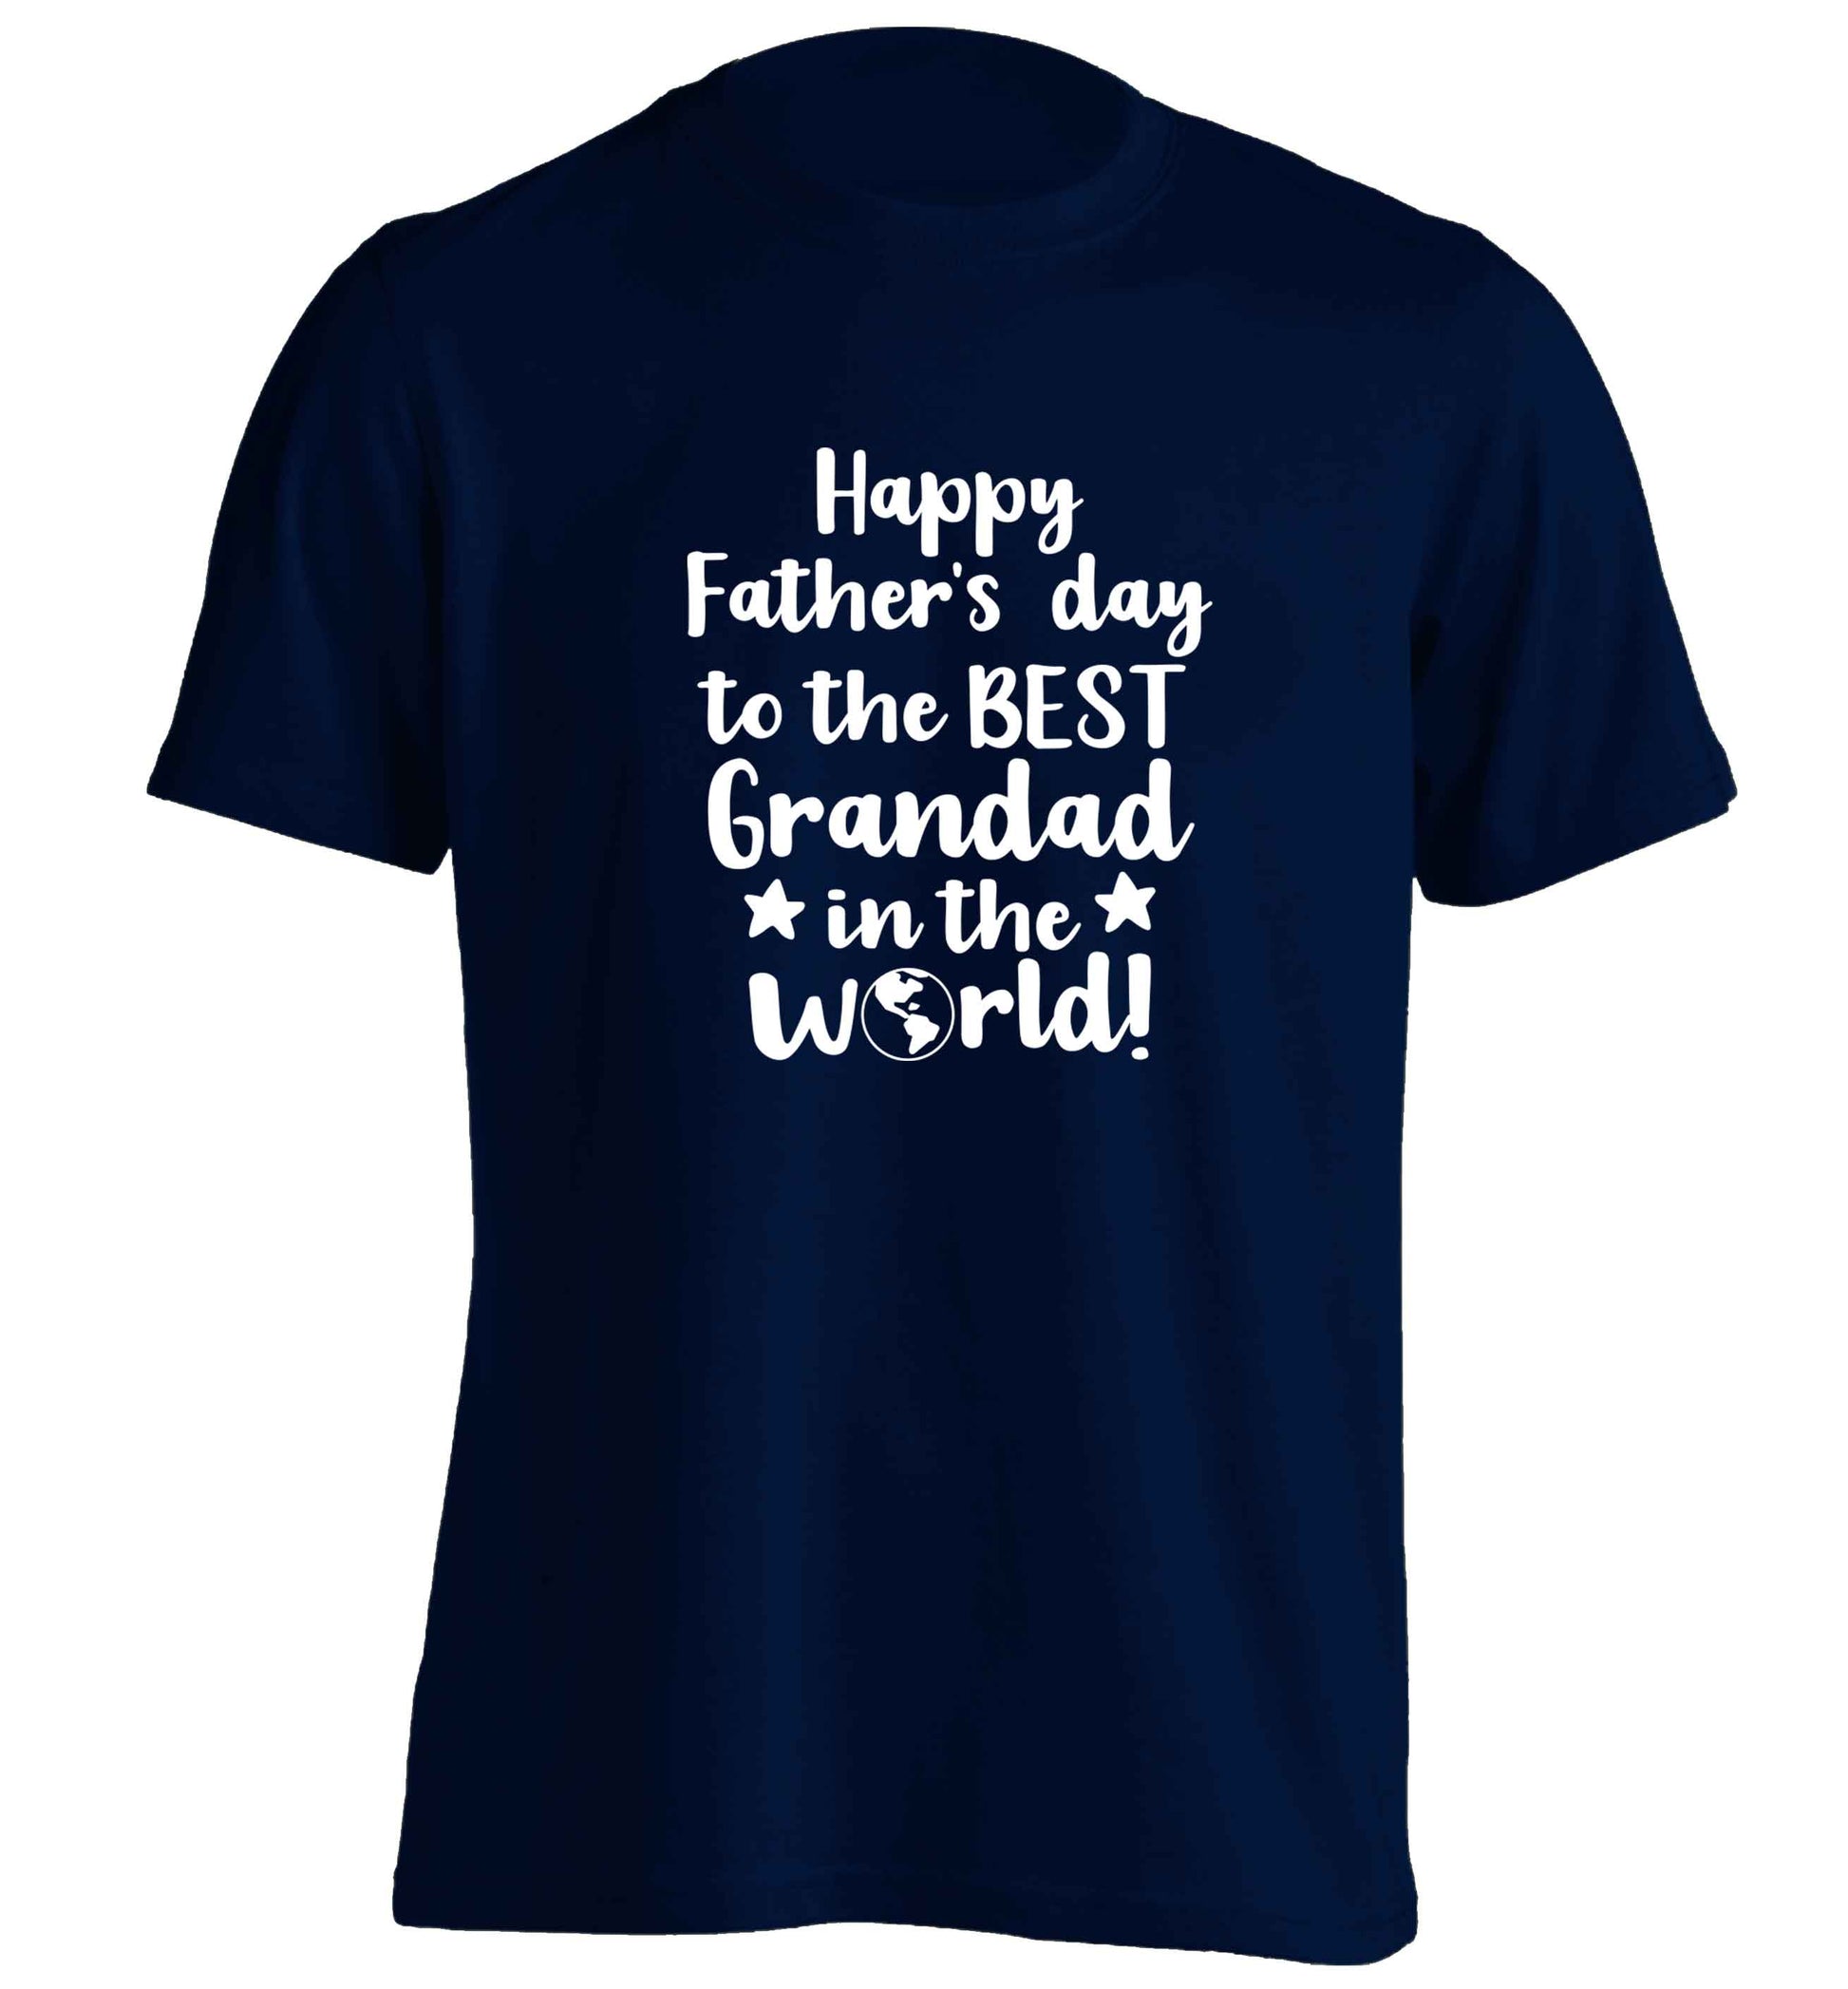 Happy Father's day to the best grandad in the world adults unisex navy Tshirt 2XL